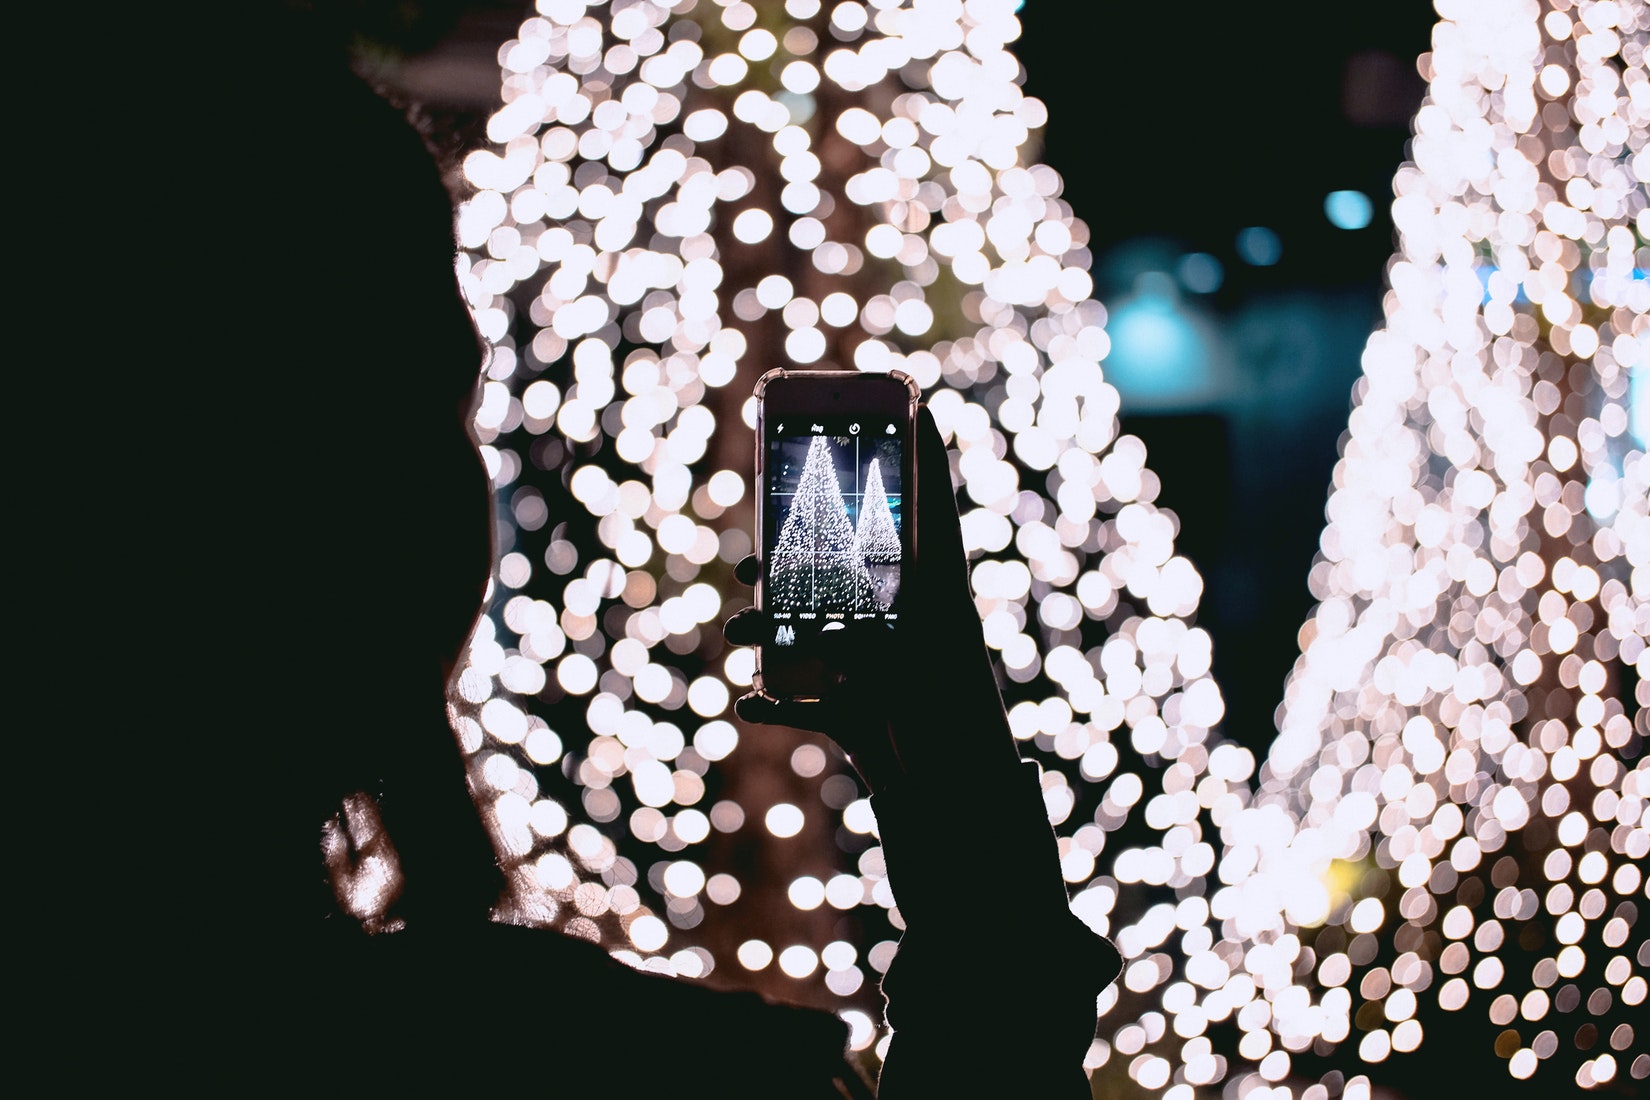 silhouette of person taking cellphone photo of 2 Christmas trees decorated with white lights